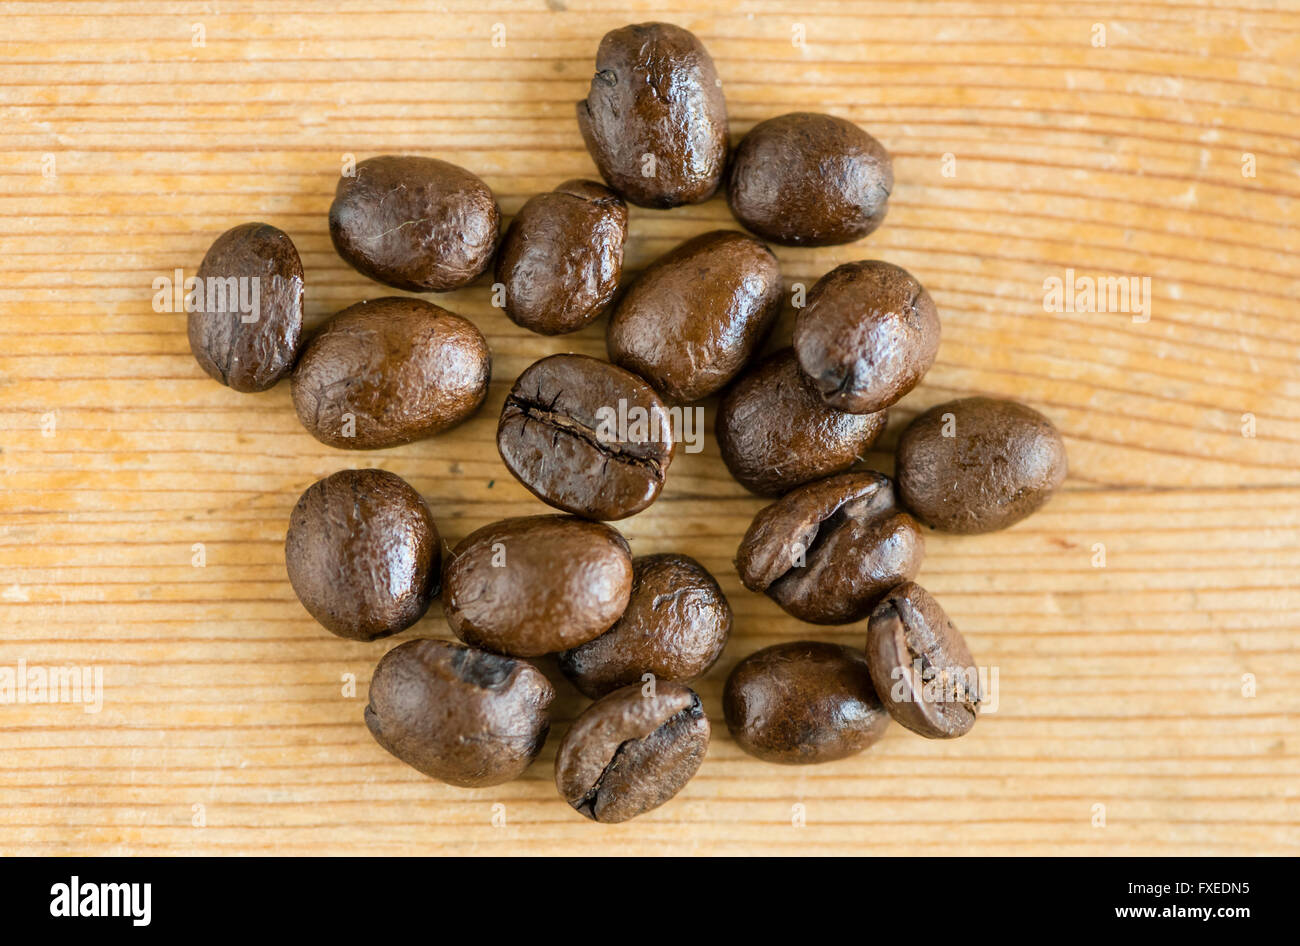 Close-up of several whole roast Espresso coffee beans on a wooden surface. Stock Photo